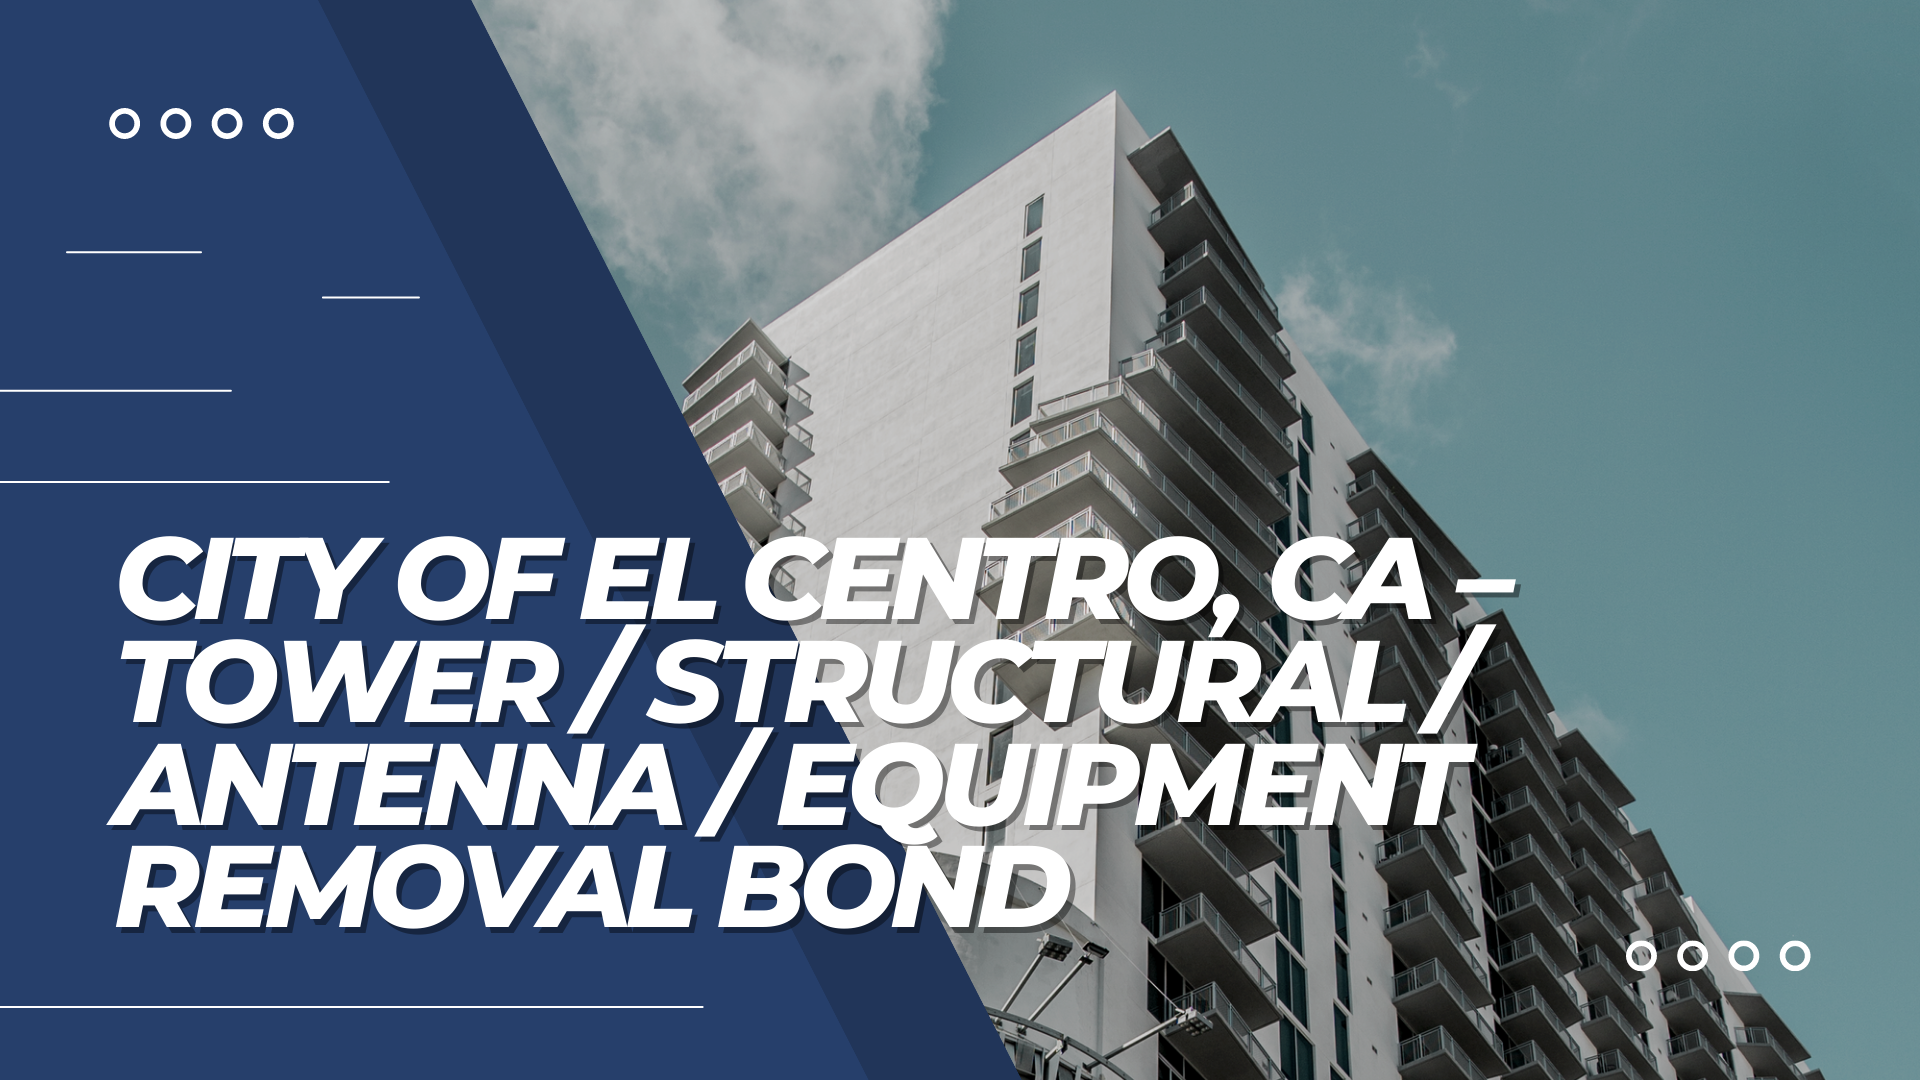 Surety Bond- City of El Centro, CA – Tower / Structural / Antenna / Equipment Removal Bond